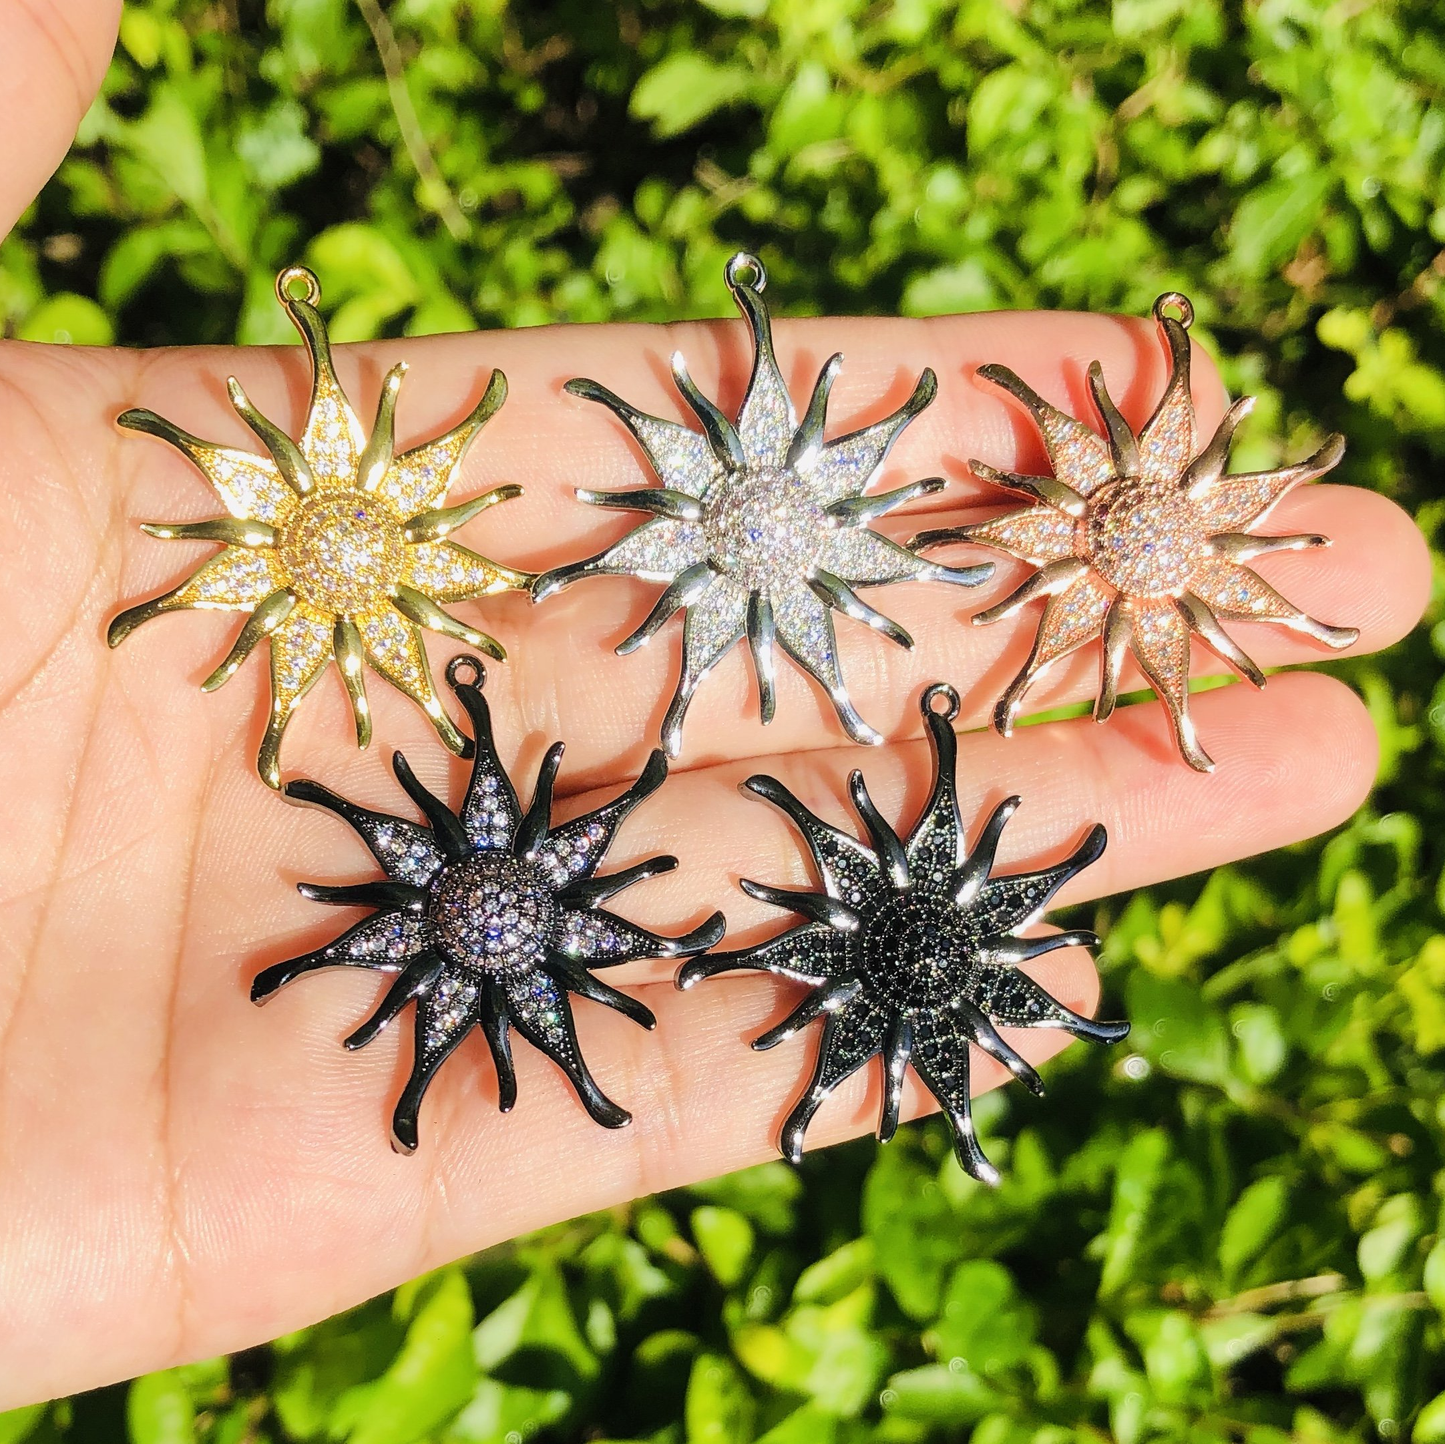 10pcs/lot 35mm CZ Paved Sunflower Charms Mix Color CZ Paved Charms Large Sizes Sun Moon Stars Charms Beads Beyond